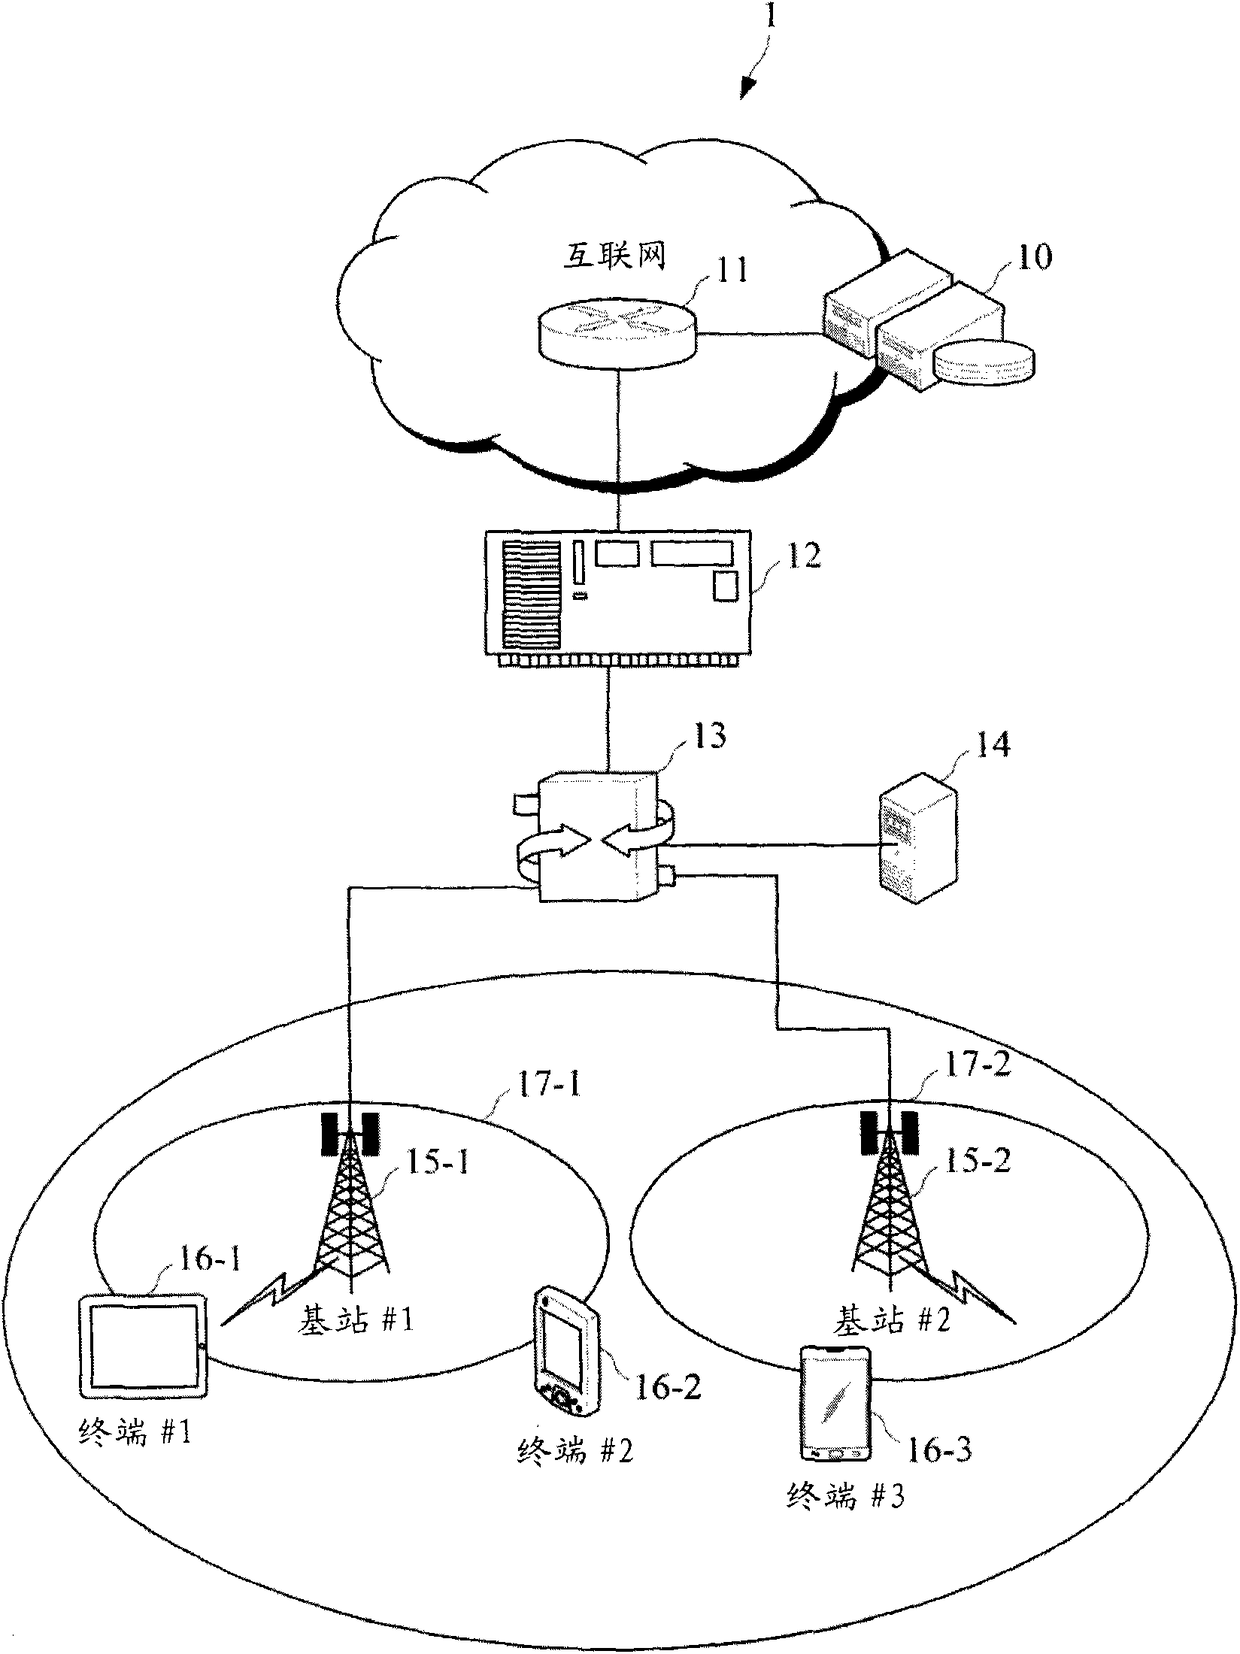 Device and method for providing video-on-demand service based on mixed use of multicast and unicast